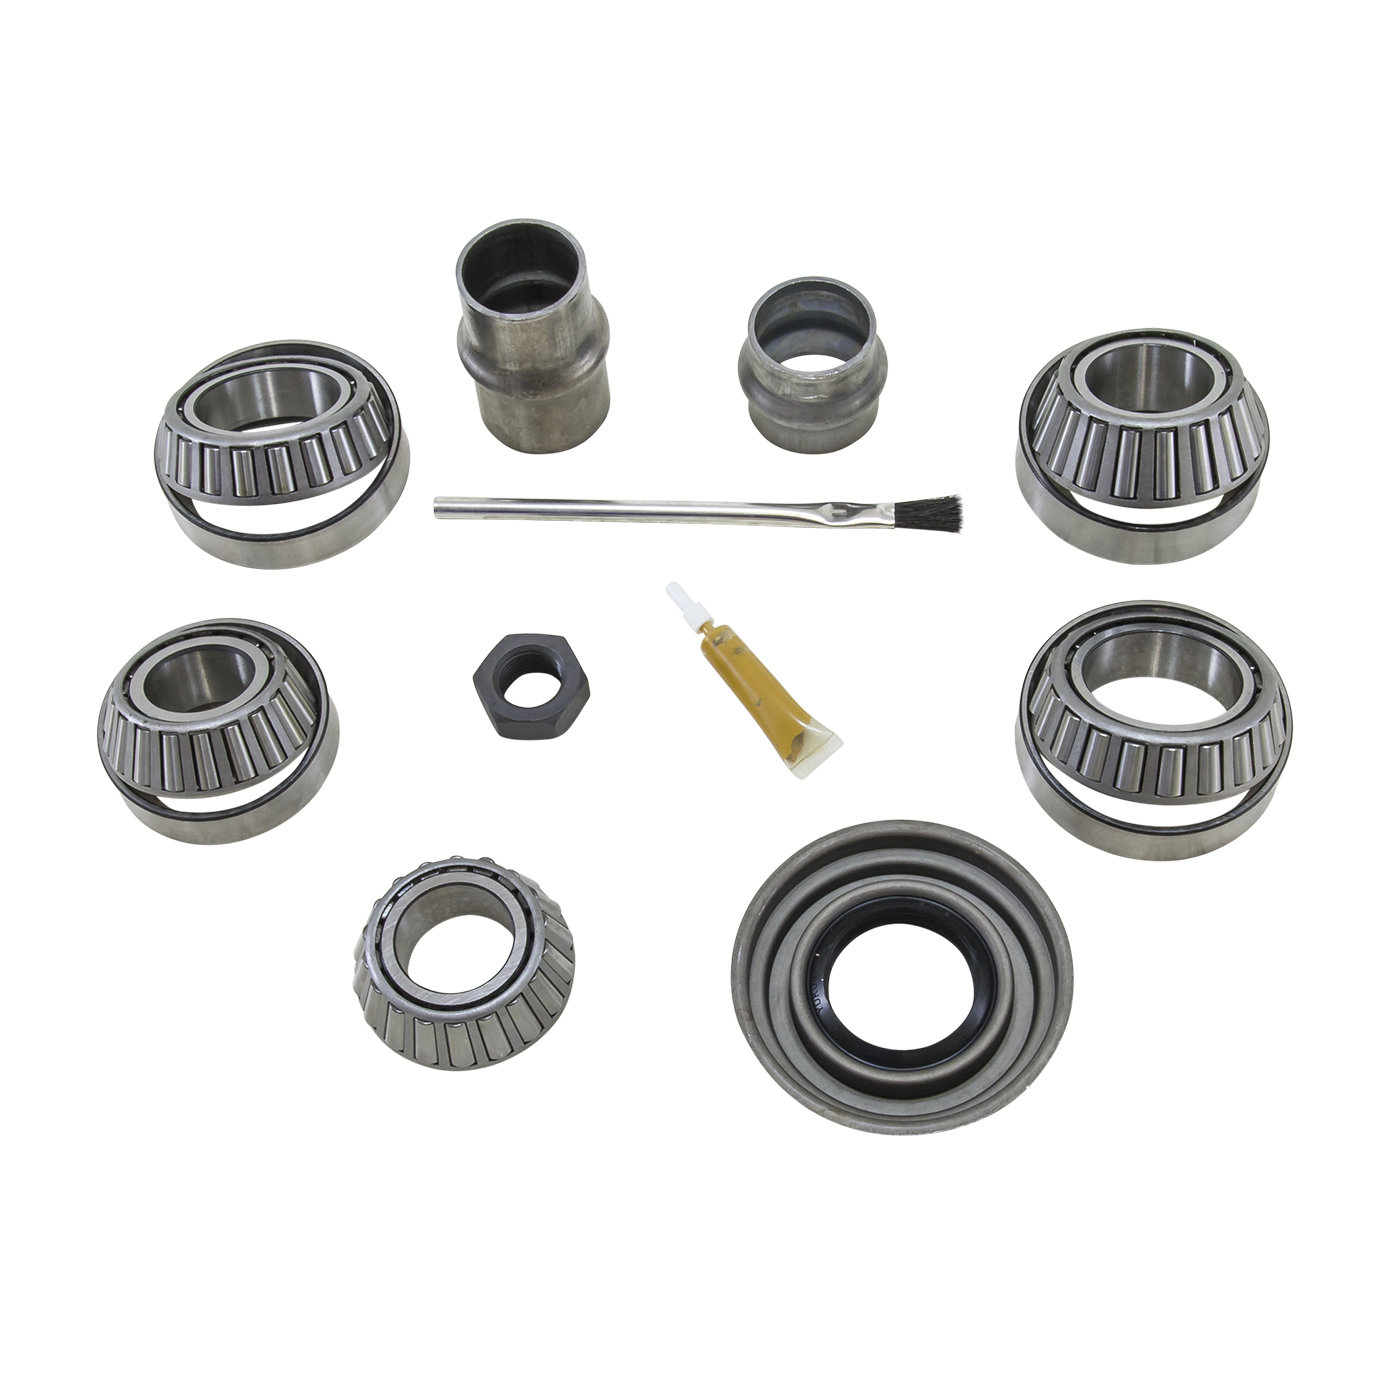 For Jeep Grand Cherokee 93-96 Motive Gear Differential Master Bearing Kit